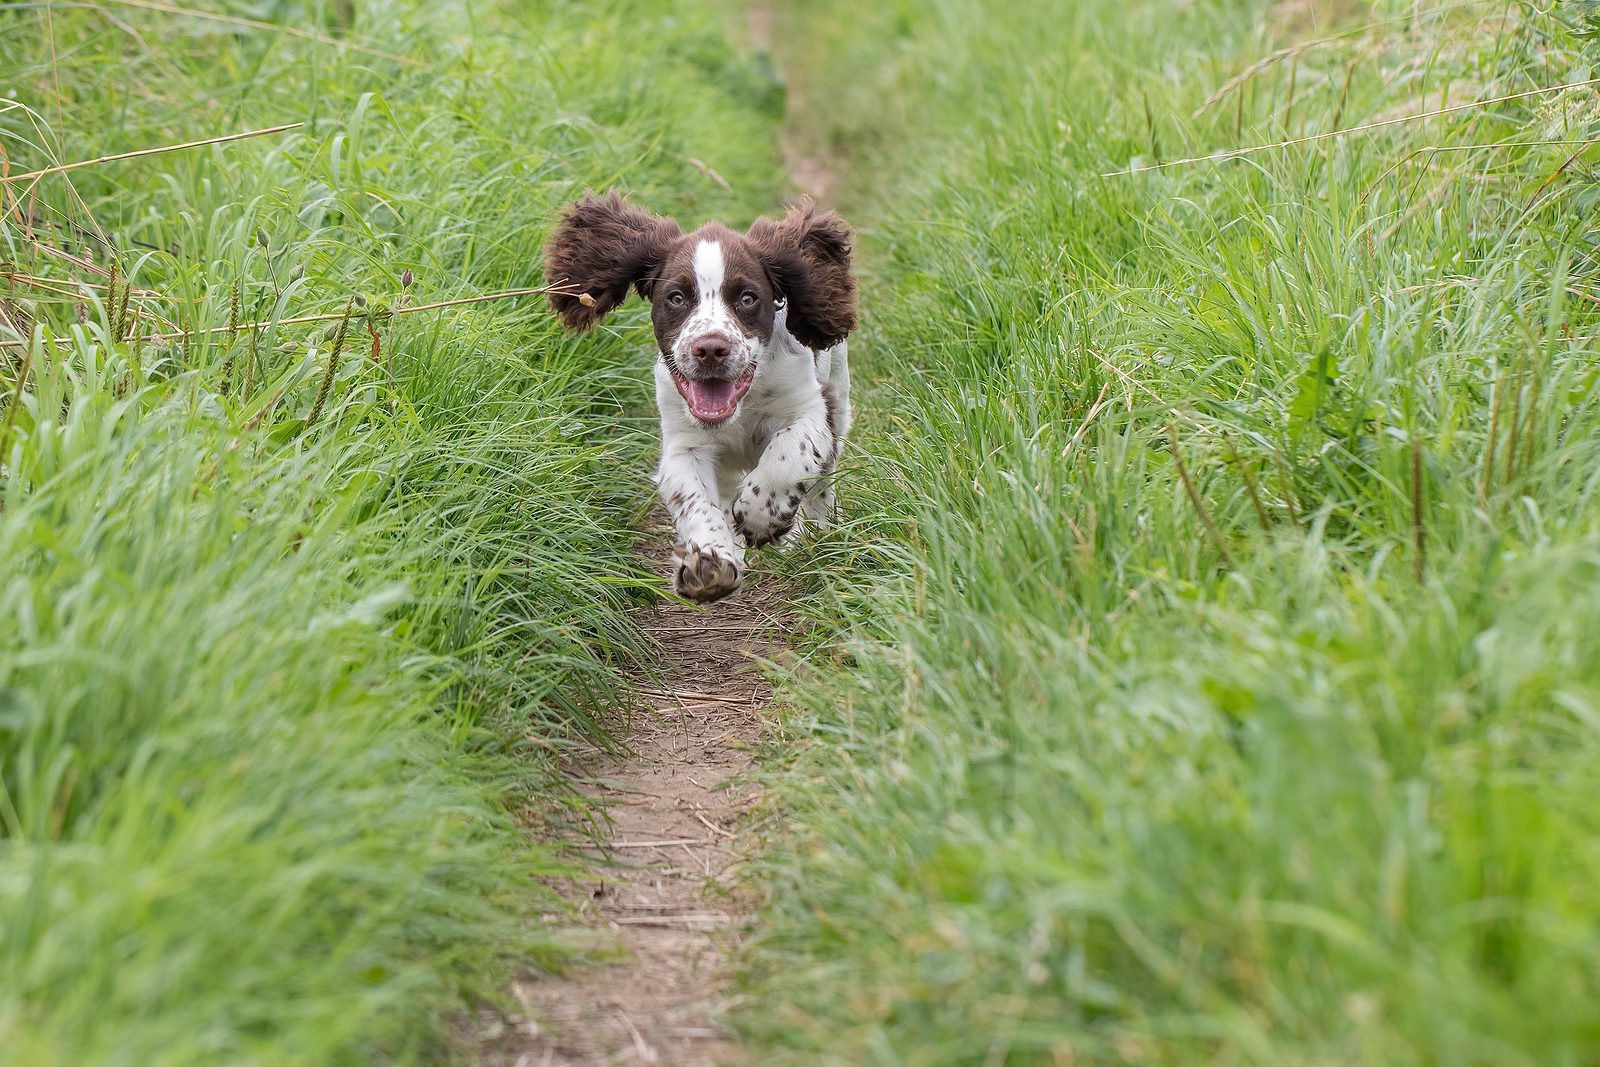 A happy dog running off leash outdoors in a field